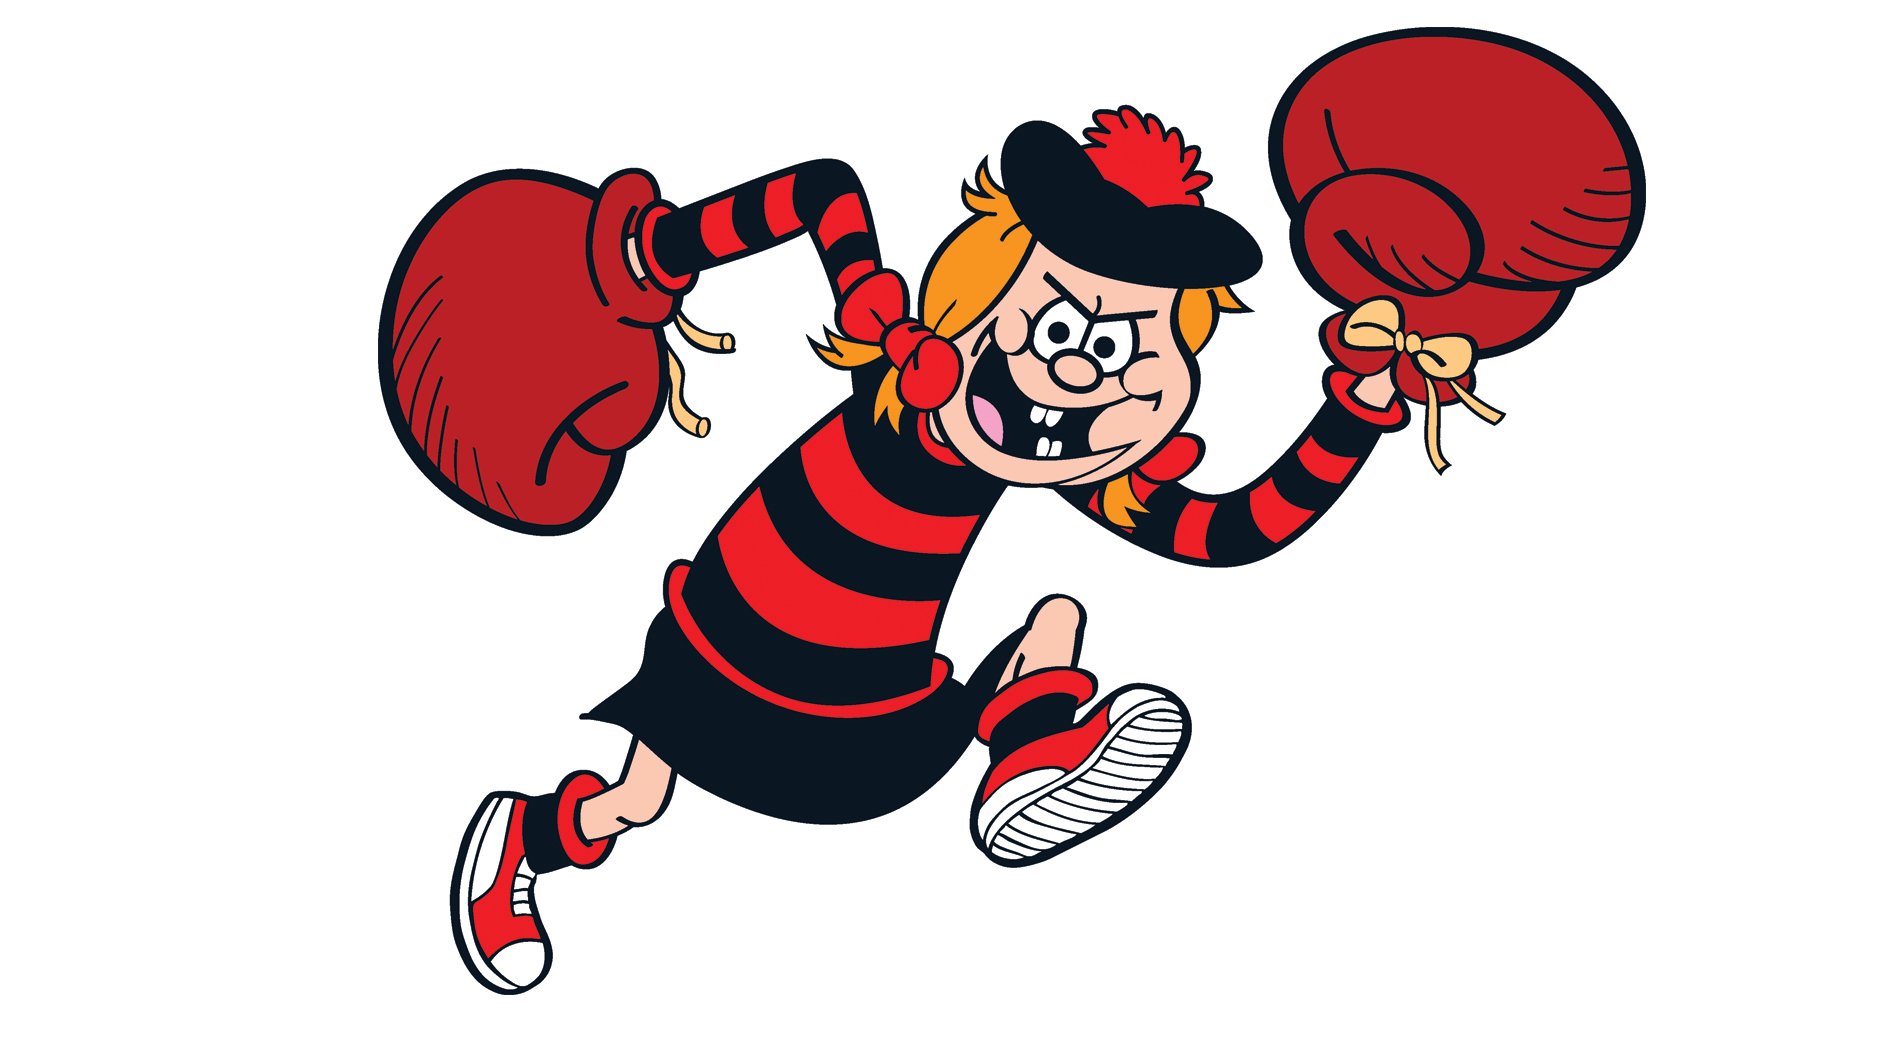 Minnie the Minx with giant boxing gloves